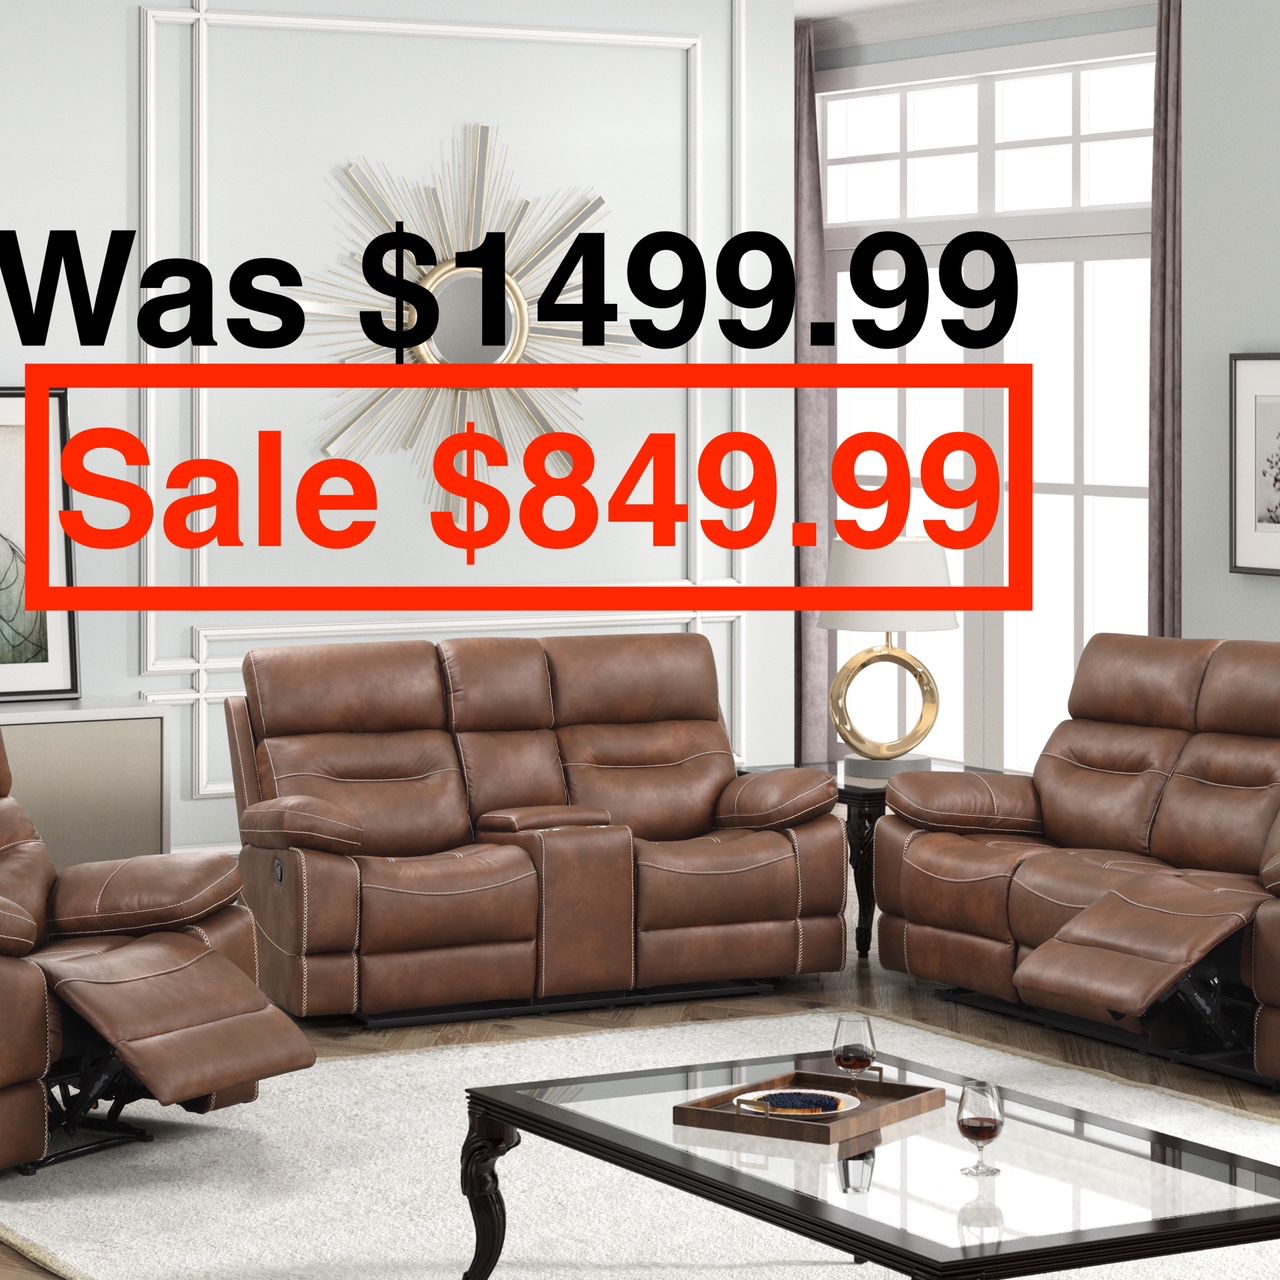 3 Piece Brown Reclining Sofa Set ( Loveseat has a Console with 2 Cup Holders & a Storage) 